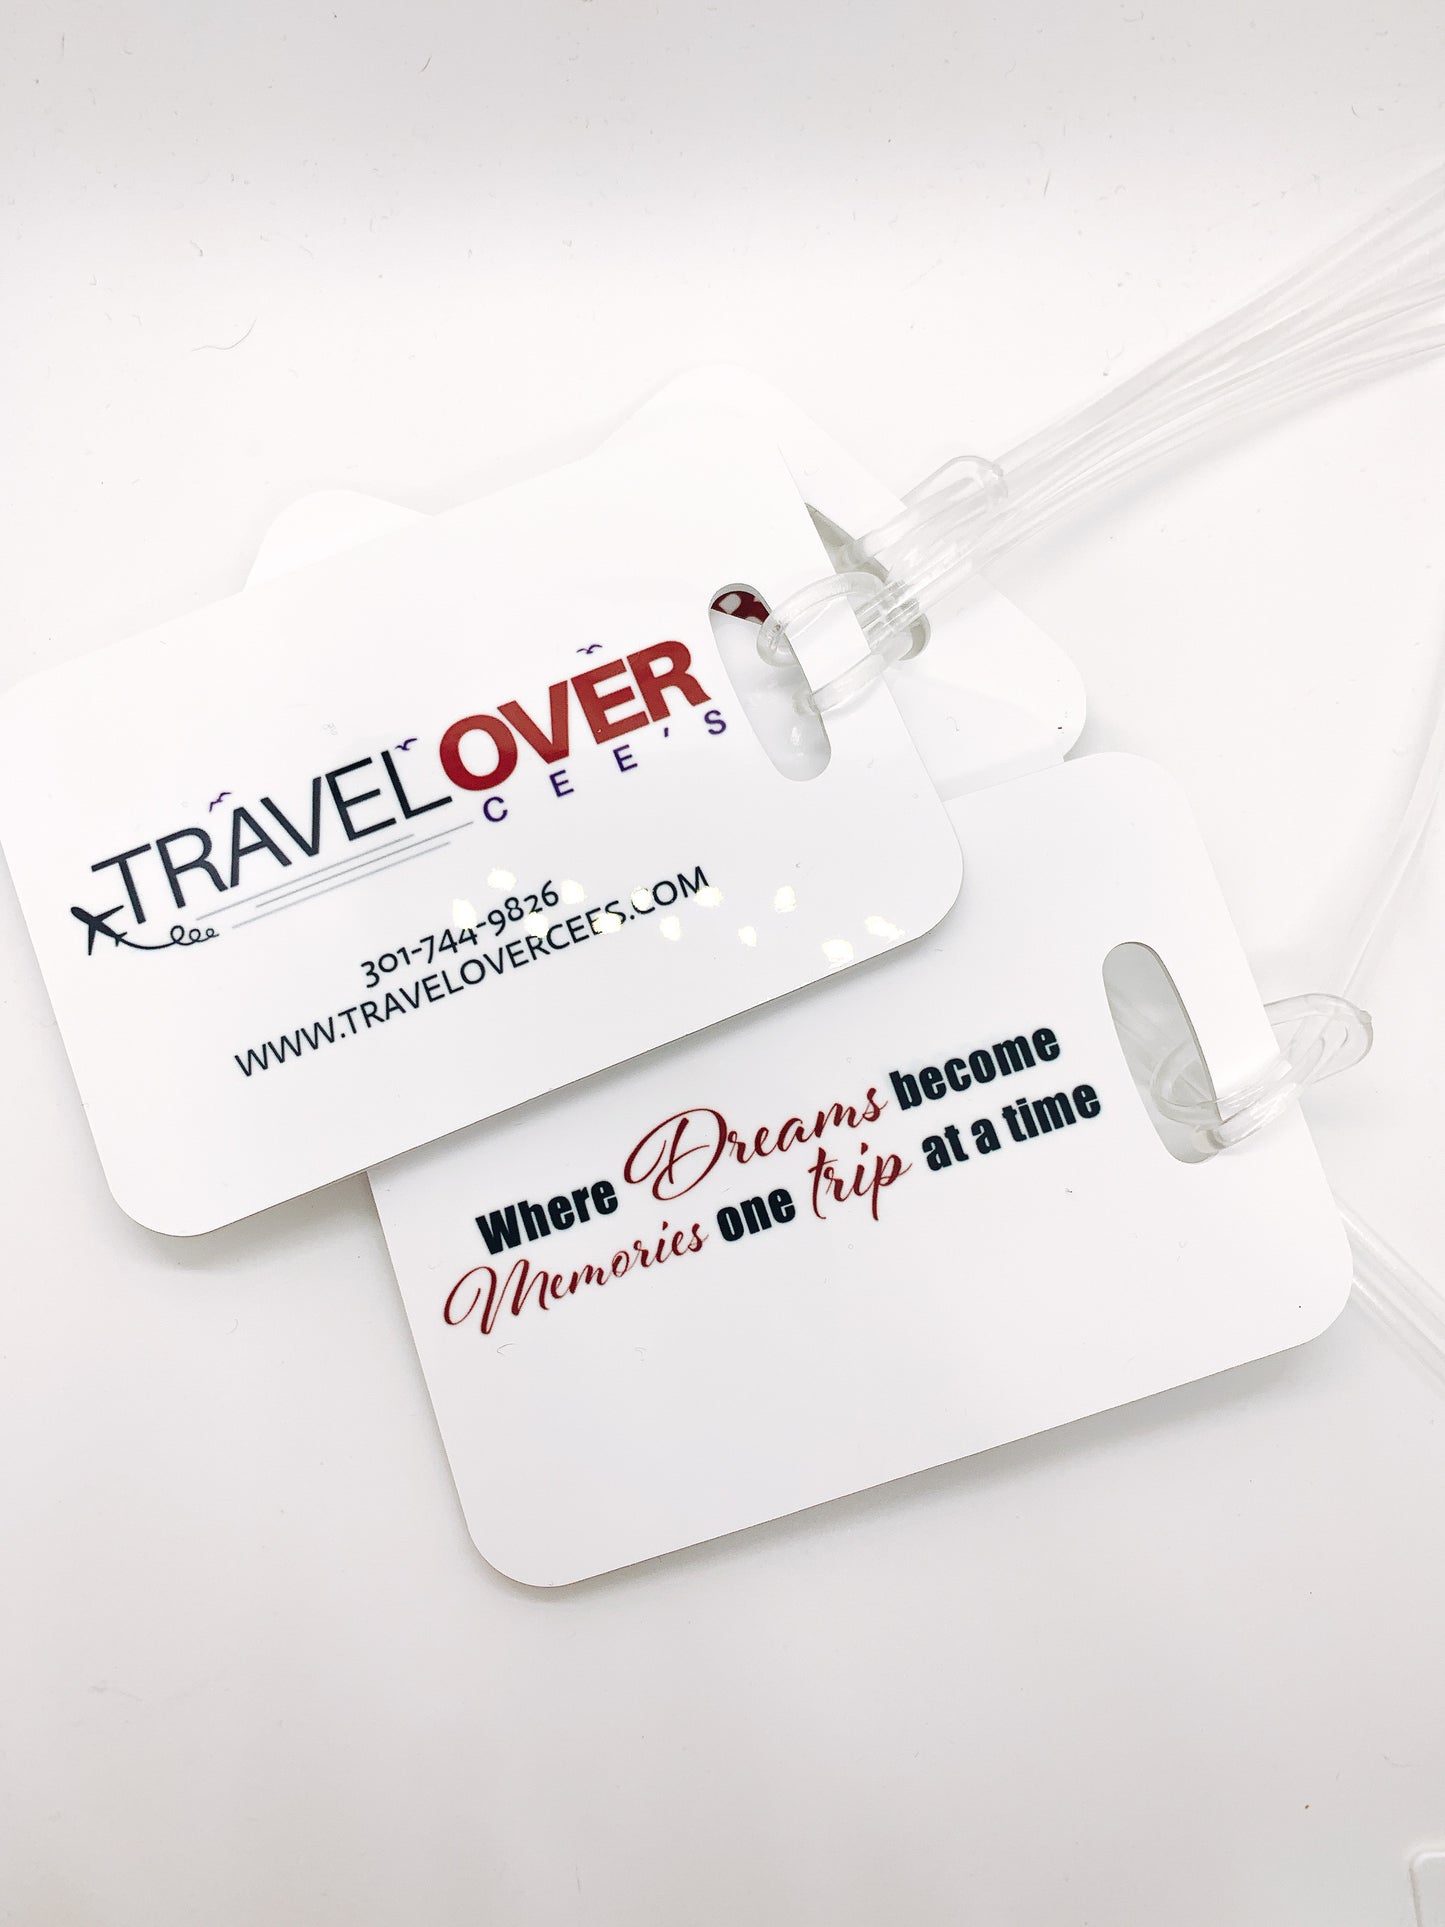 Luggage tags or qr code